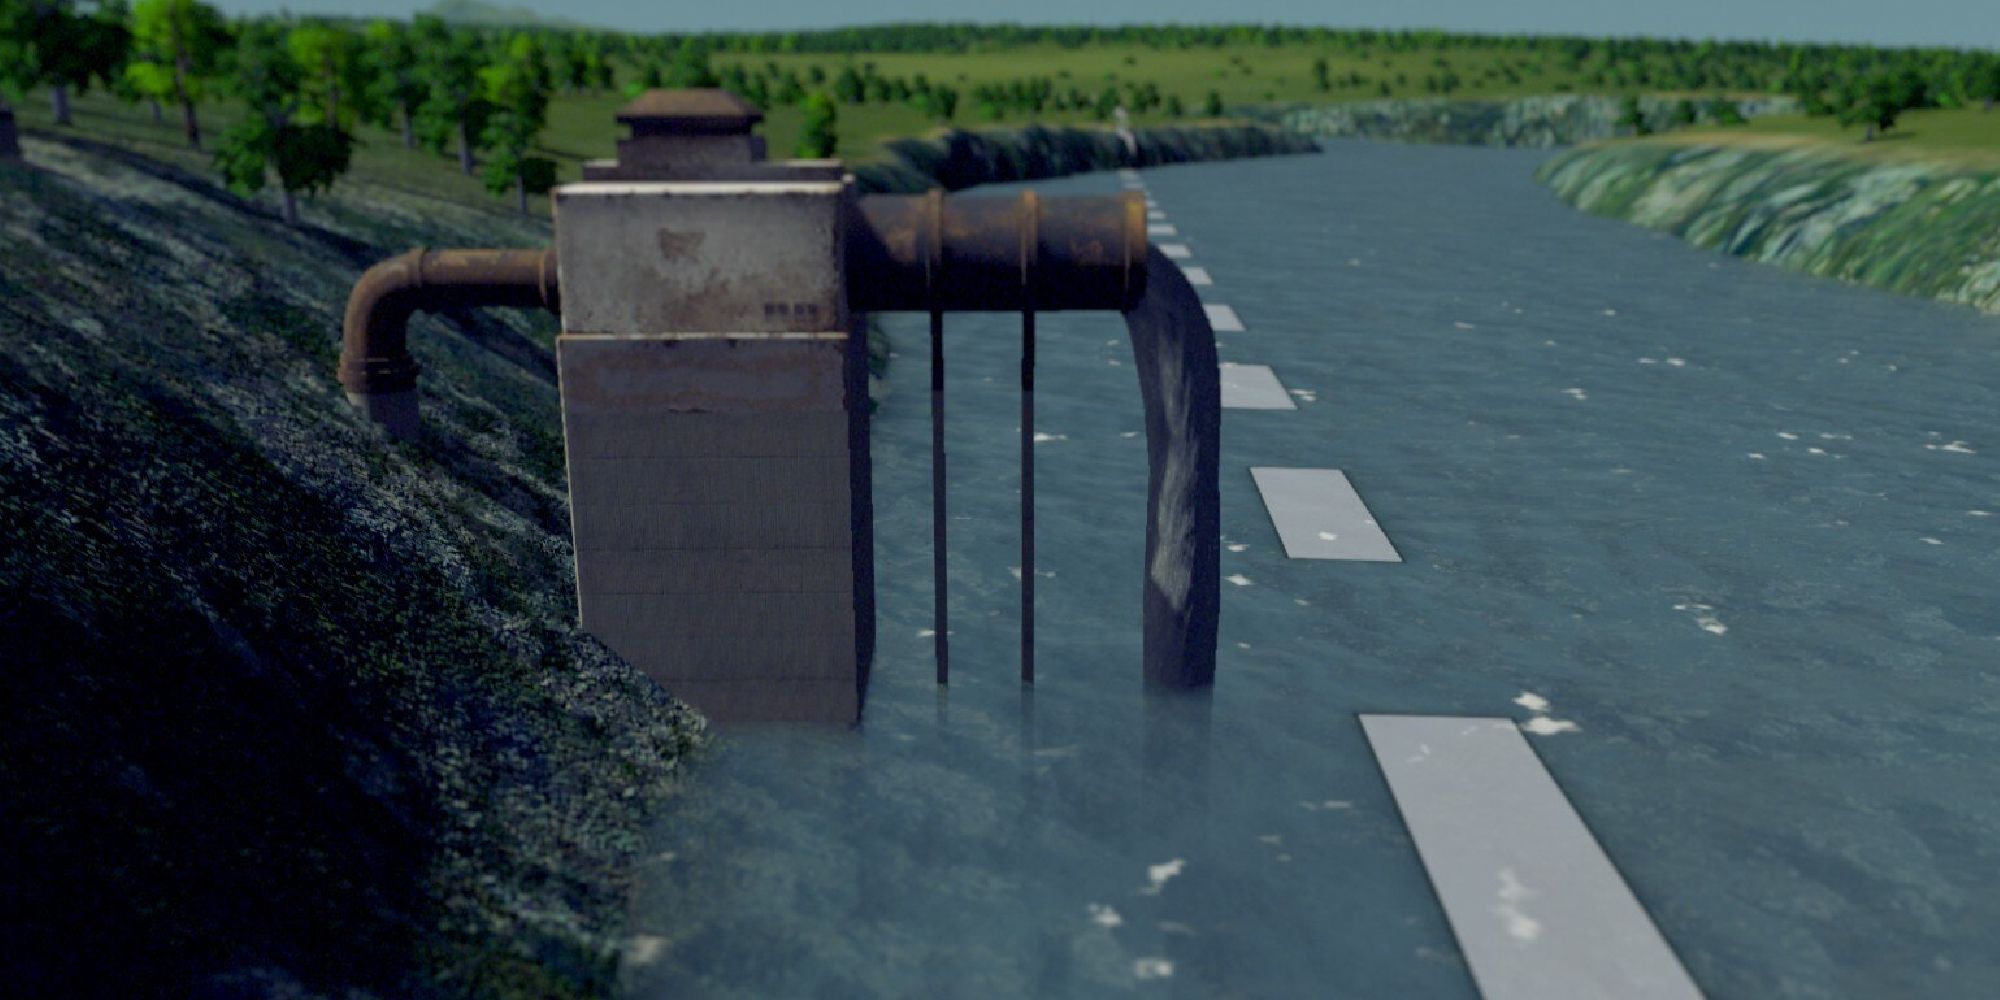 cities skylines sewage coming from water treatment center, draining into water